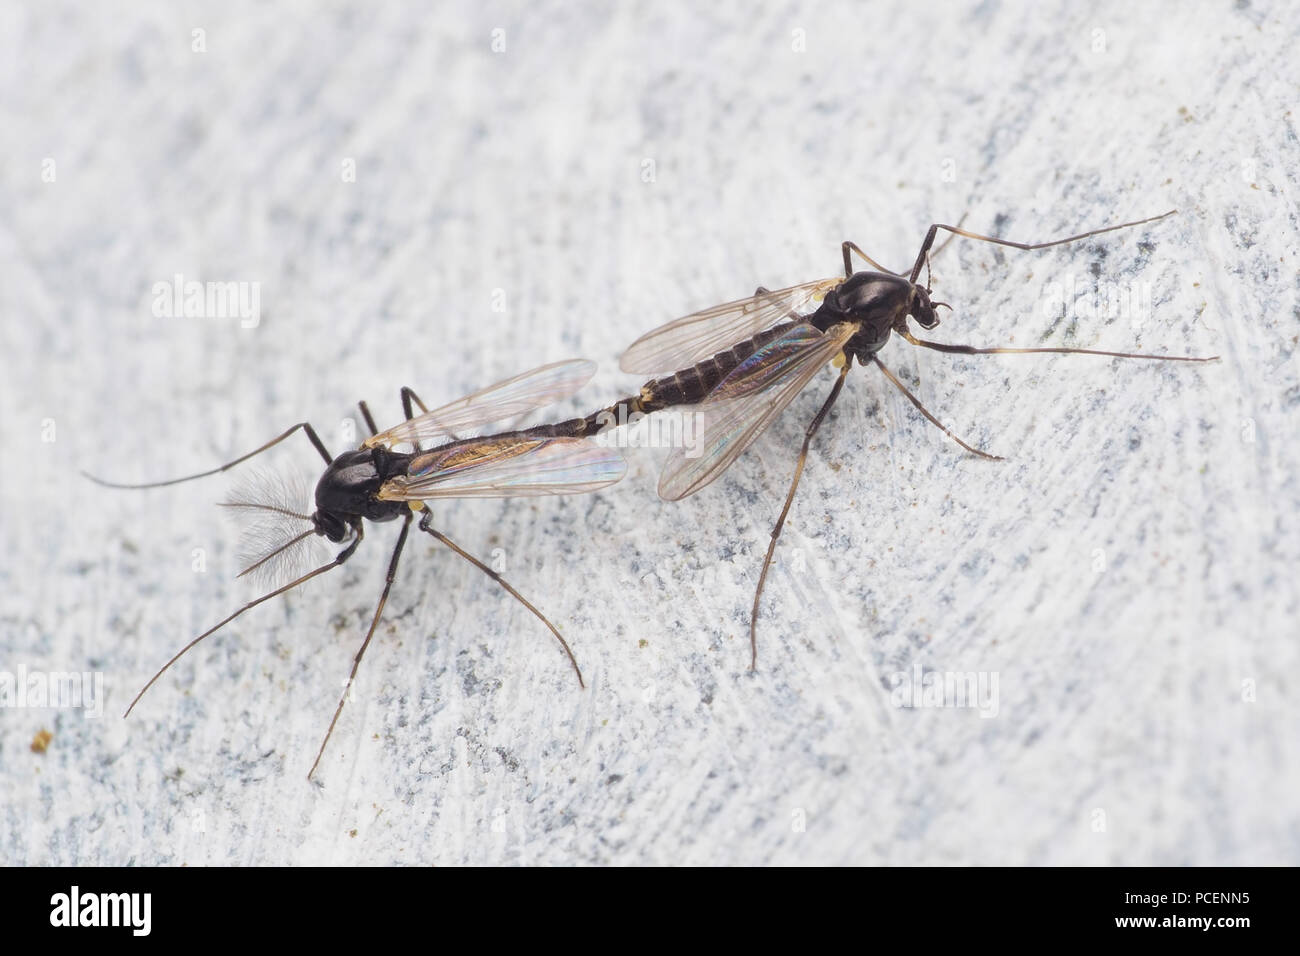 Mating Chironomid or non-biting Midges on wall. Tipperary, Ireland Stock Photo